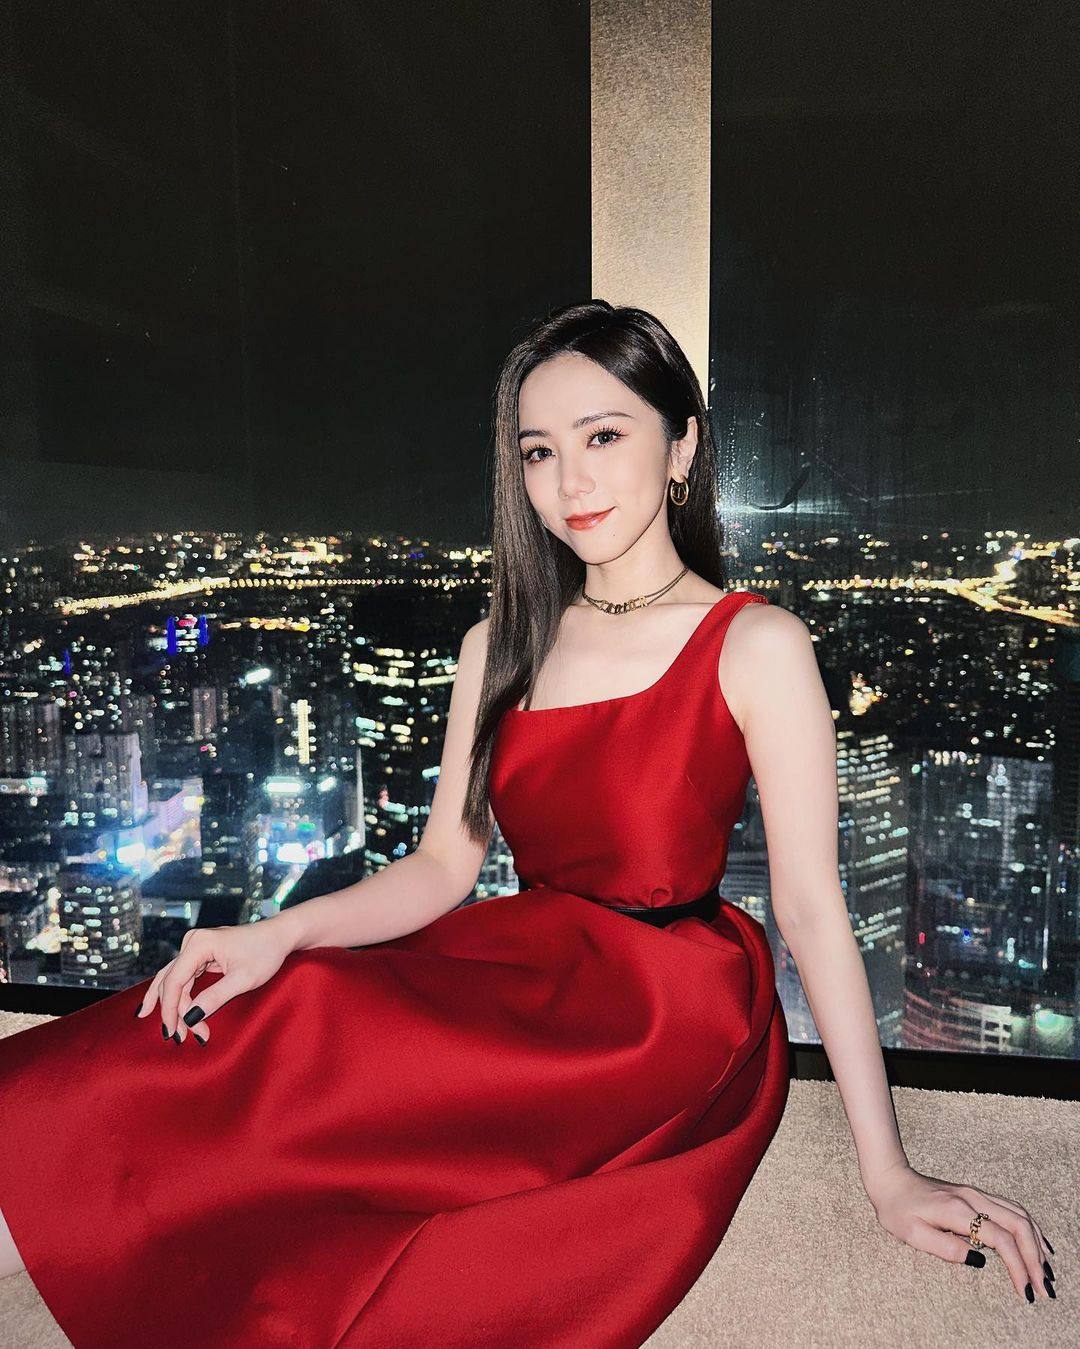 G.E.M. is one of the biggest Chinese pop stars of today. Photo: @gem0816/Instagram